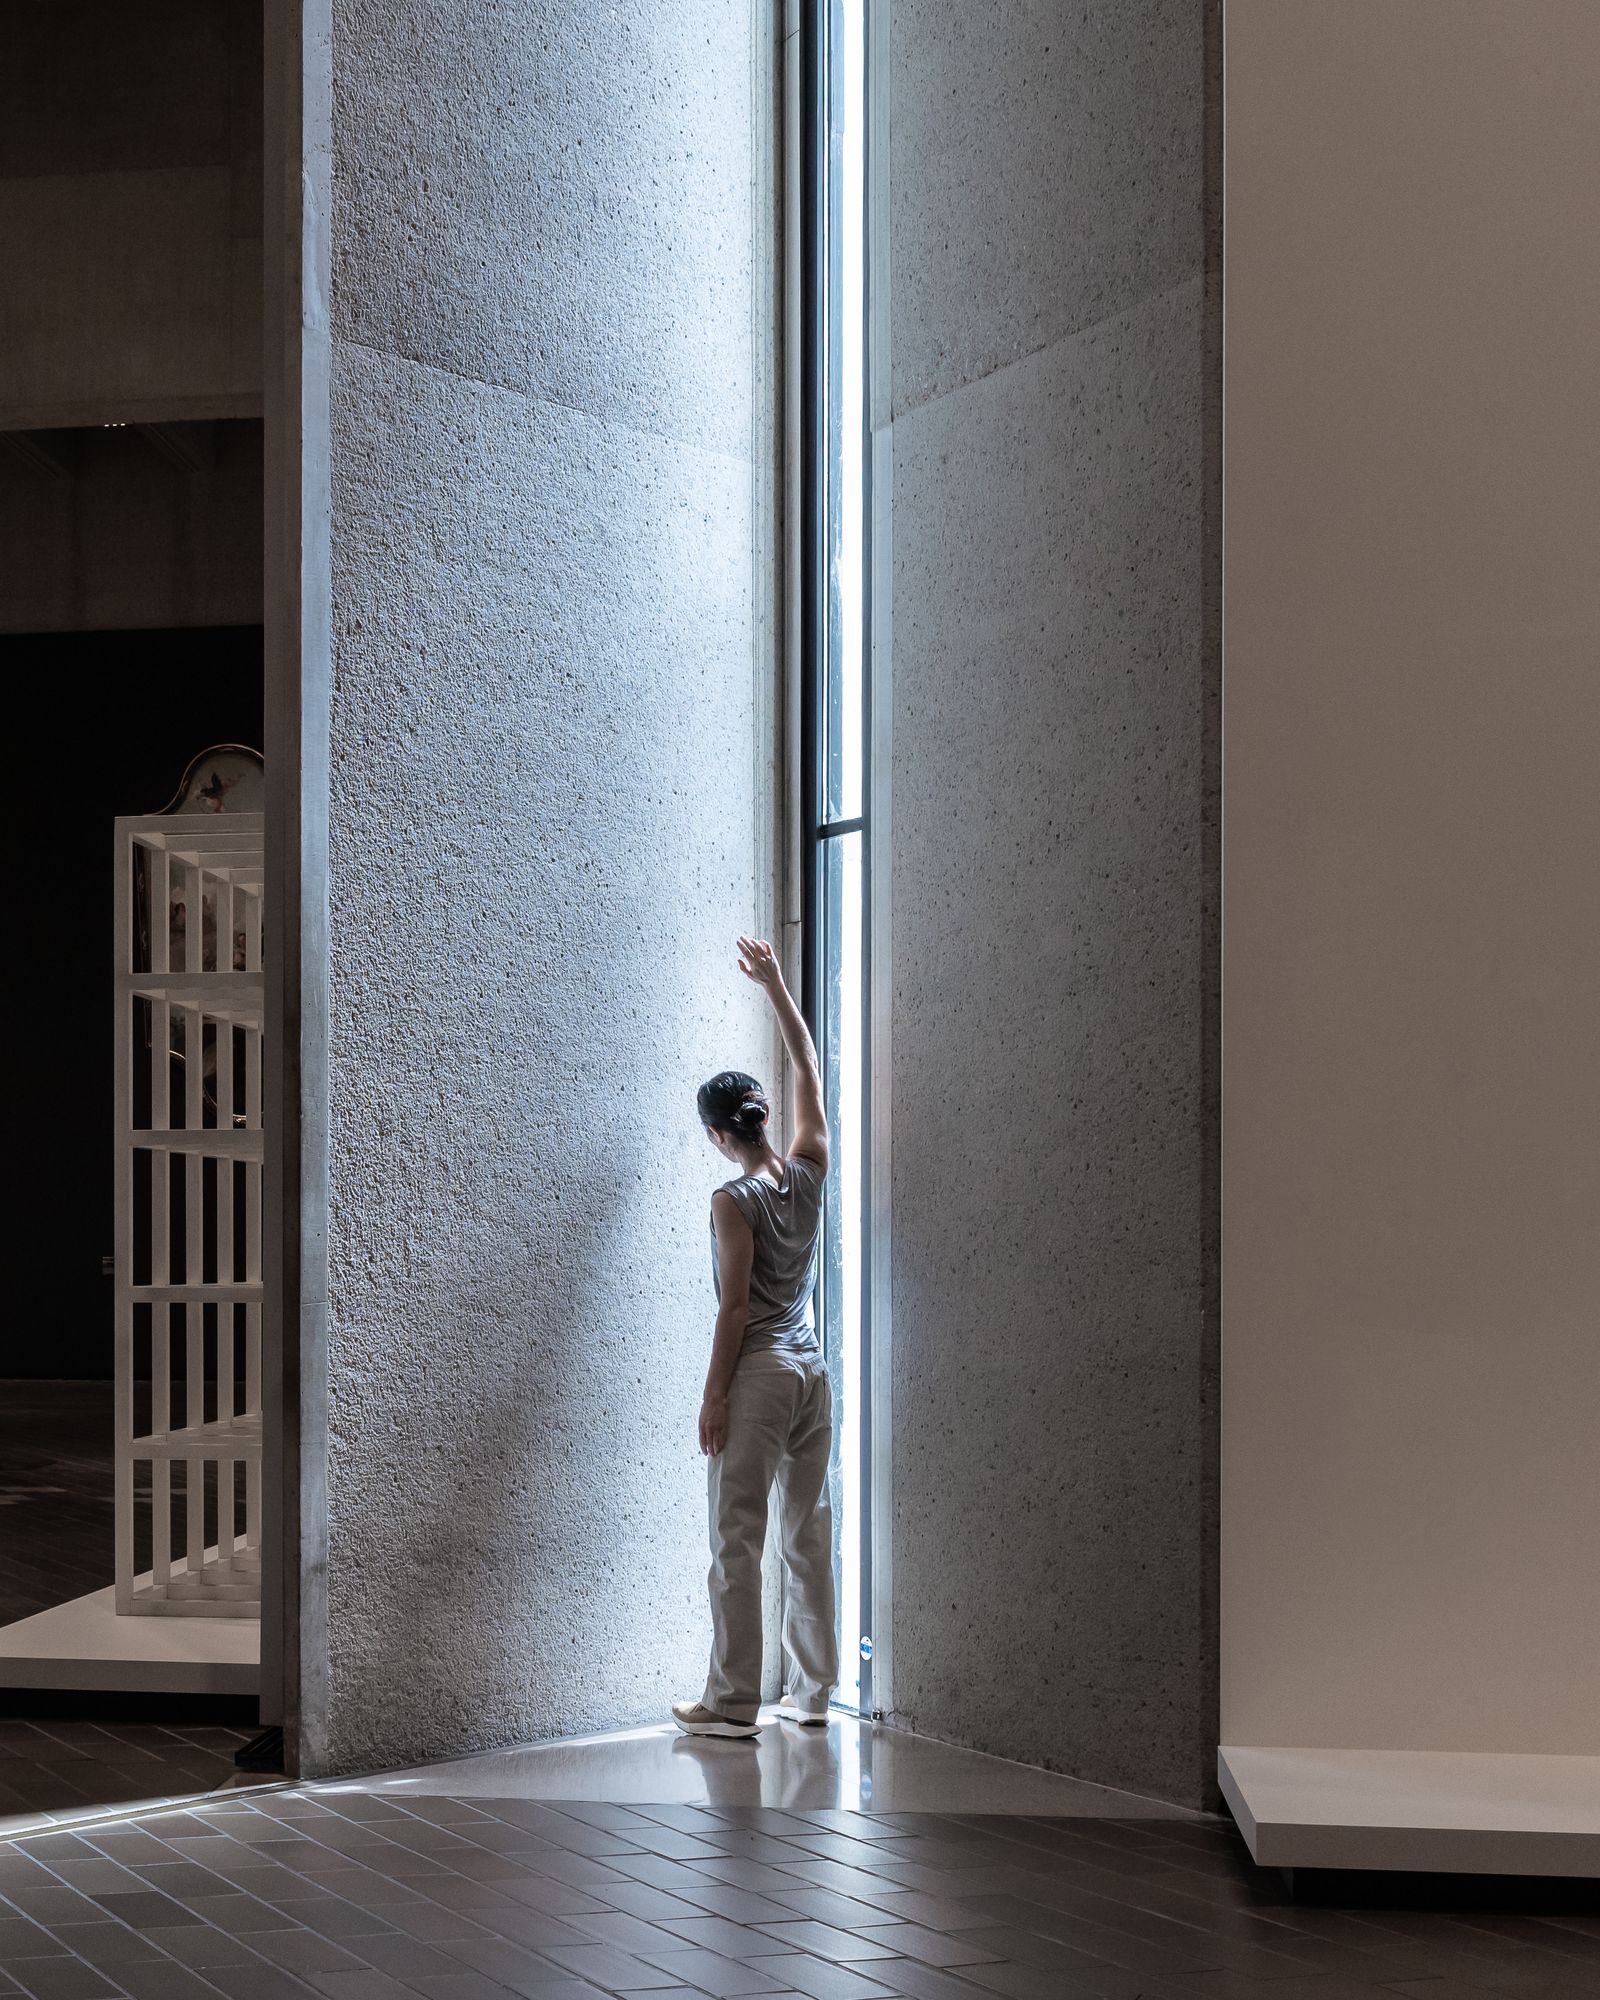 A dancers stands in the light from a window in the brutalist National Gallery architecture.